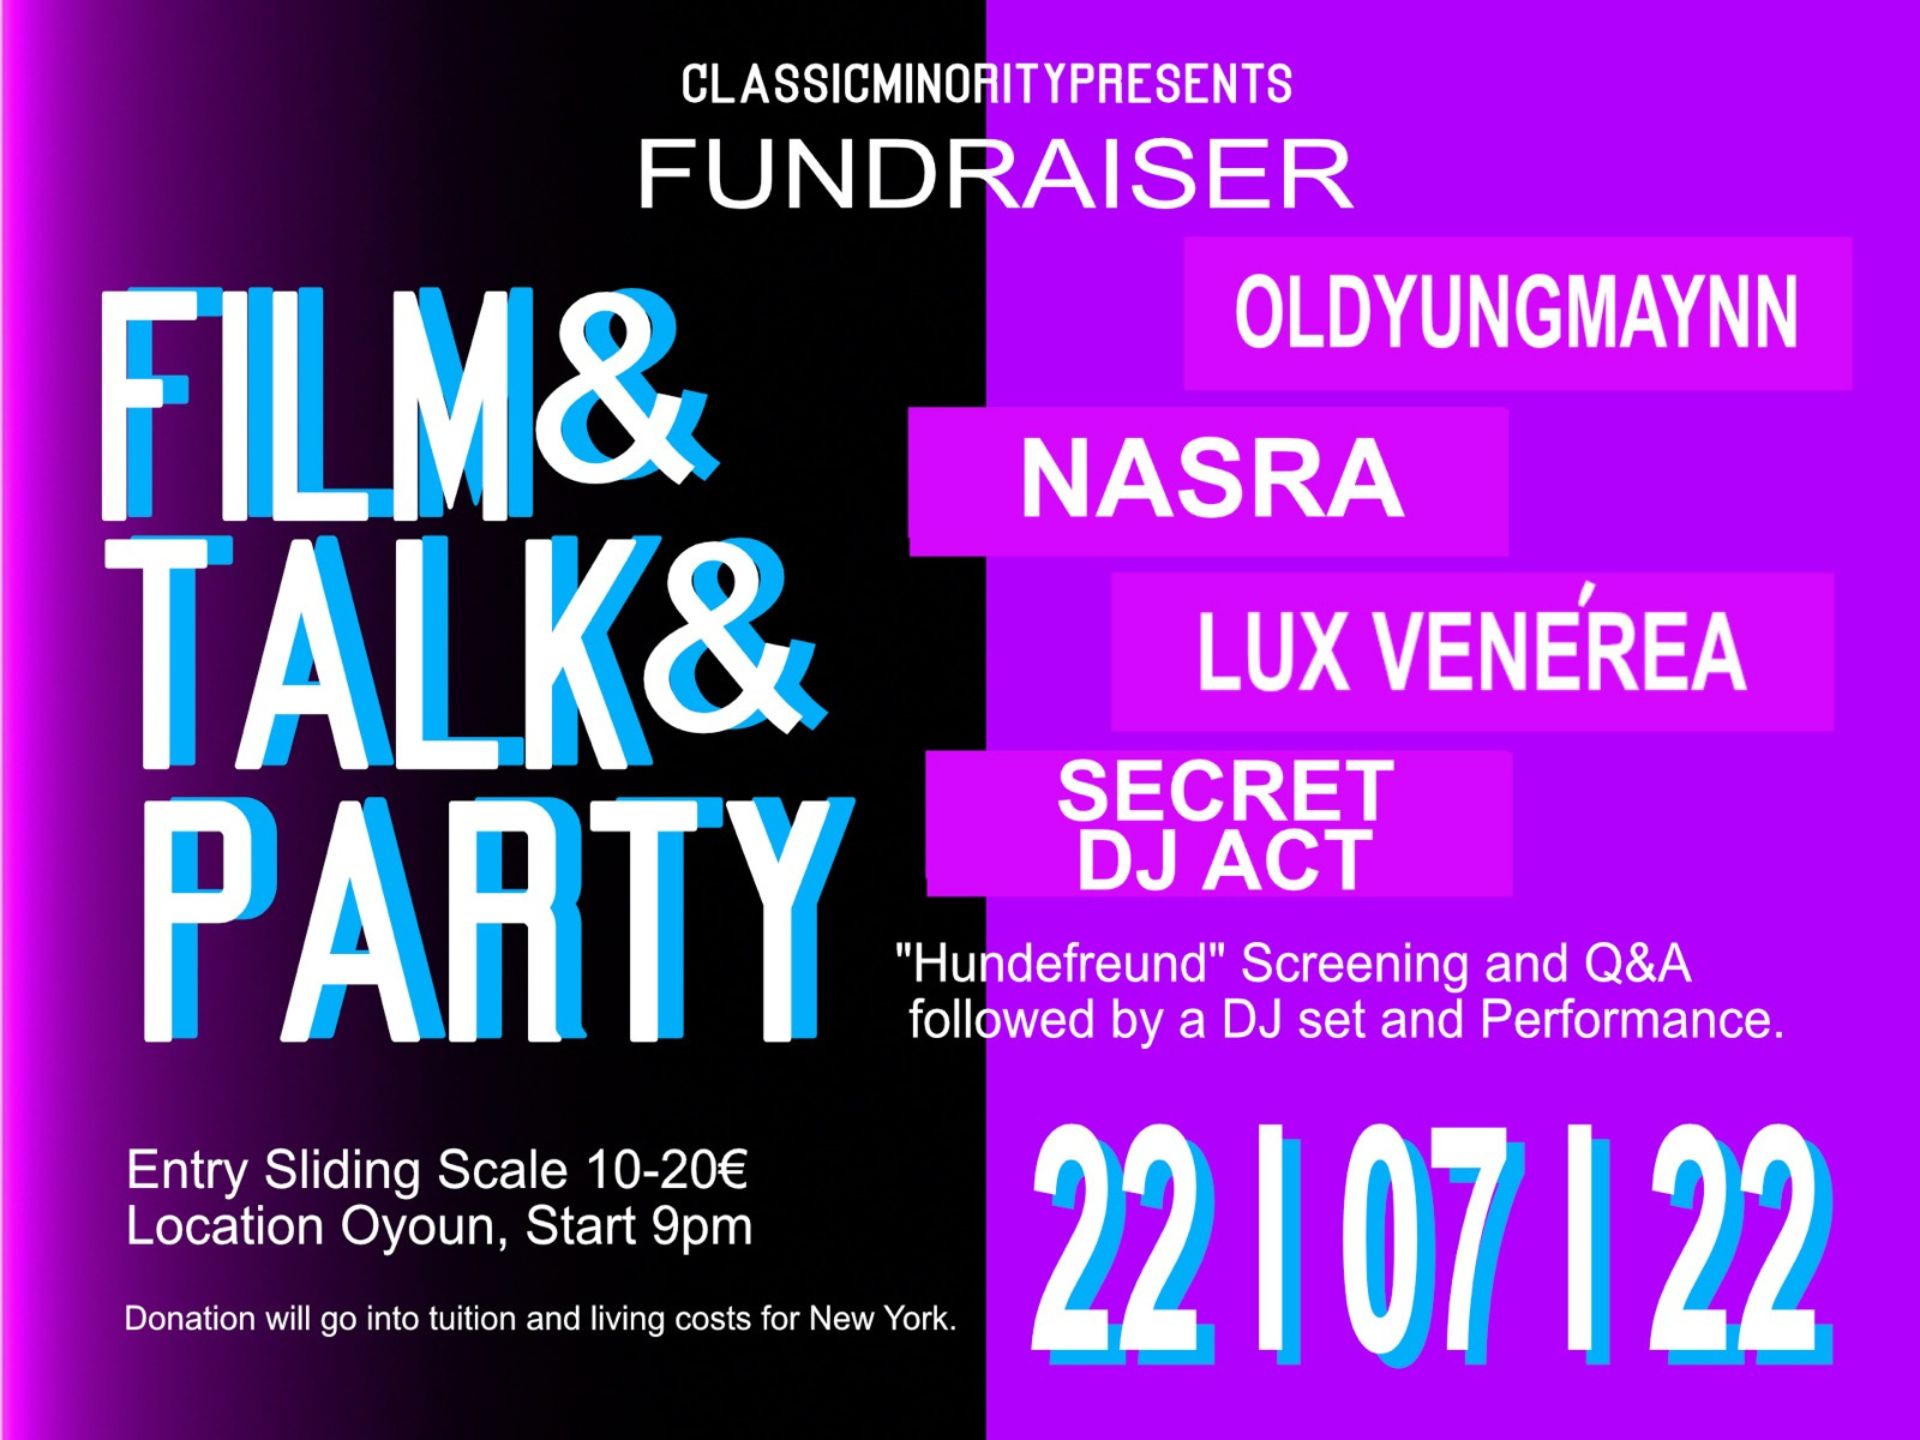 Classic Minority Presents: Fundraiser for NYU Tisch (Film Screening, Discussion & Party)